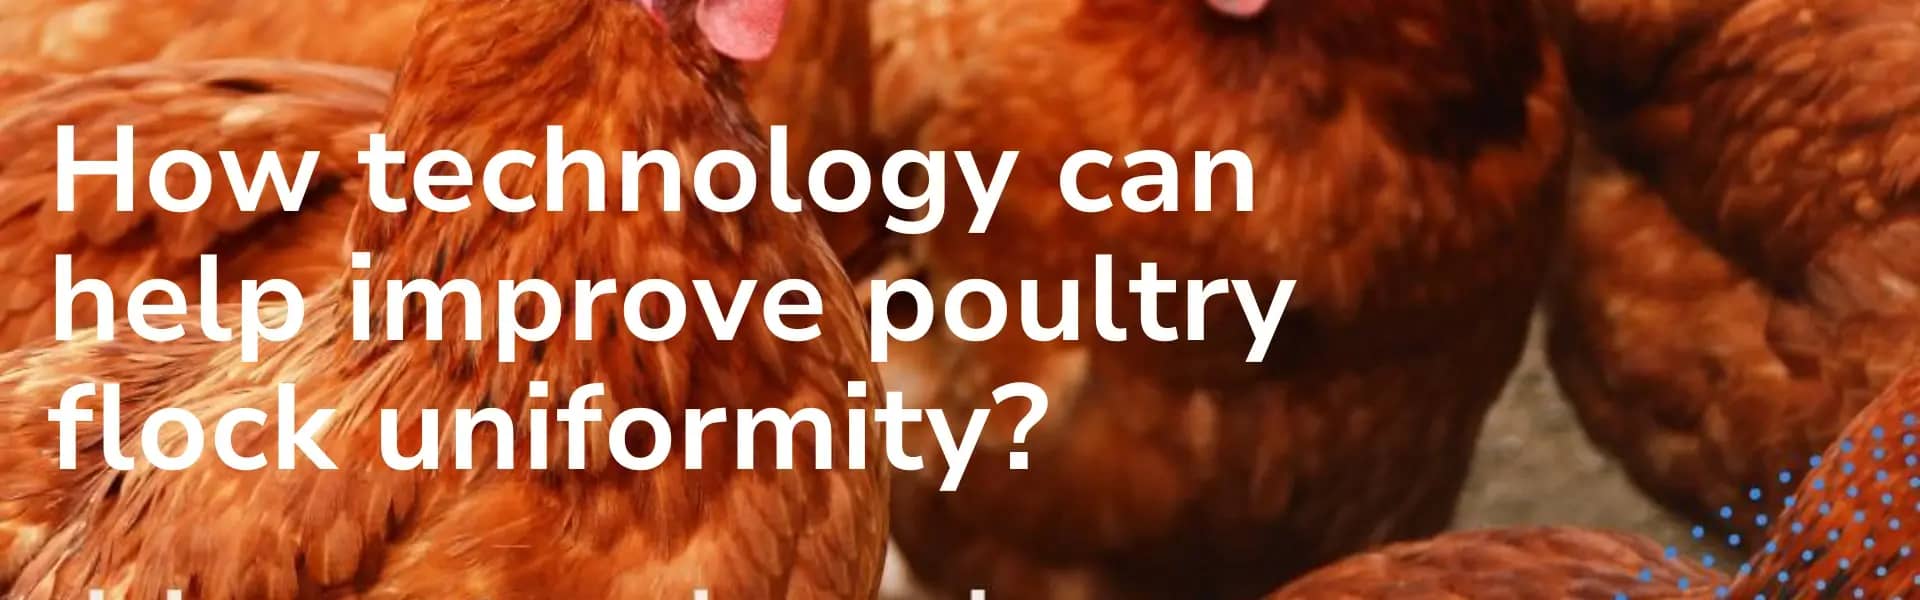 How technology can help improve poultry flock uniformity